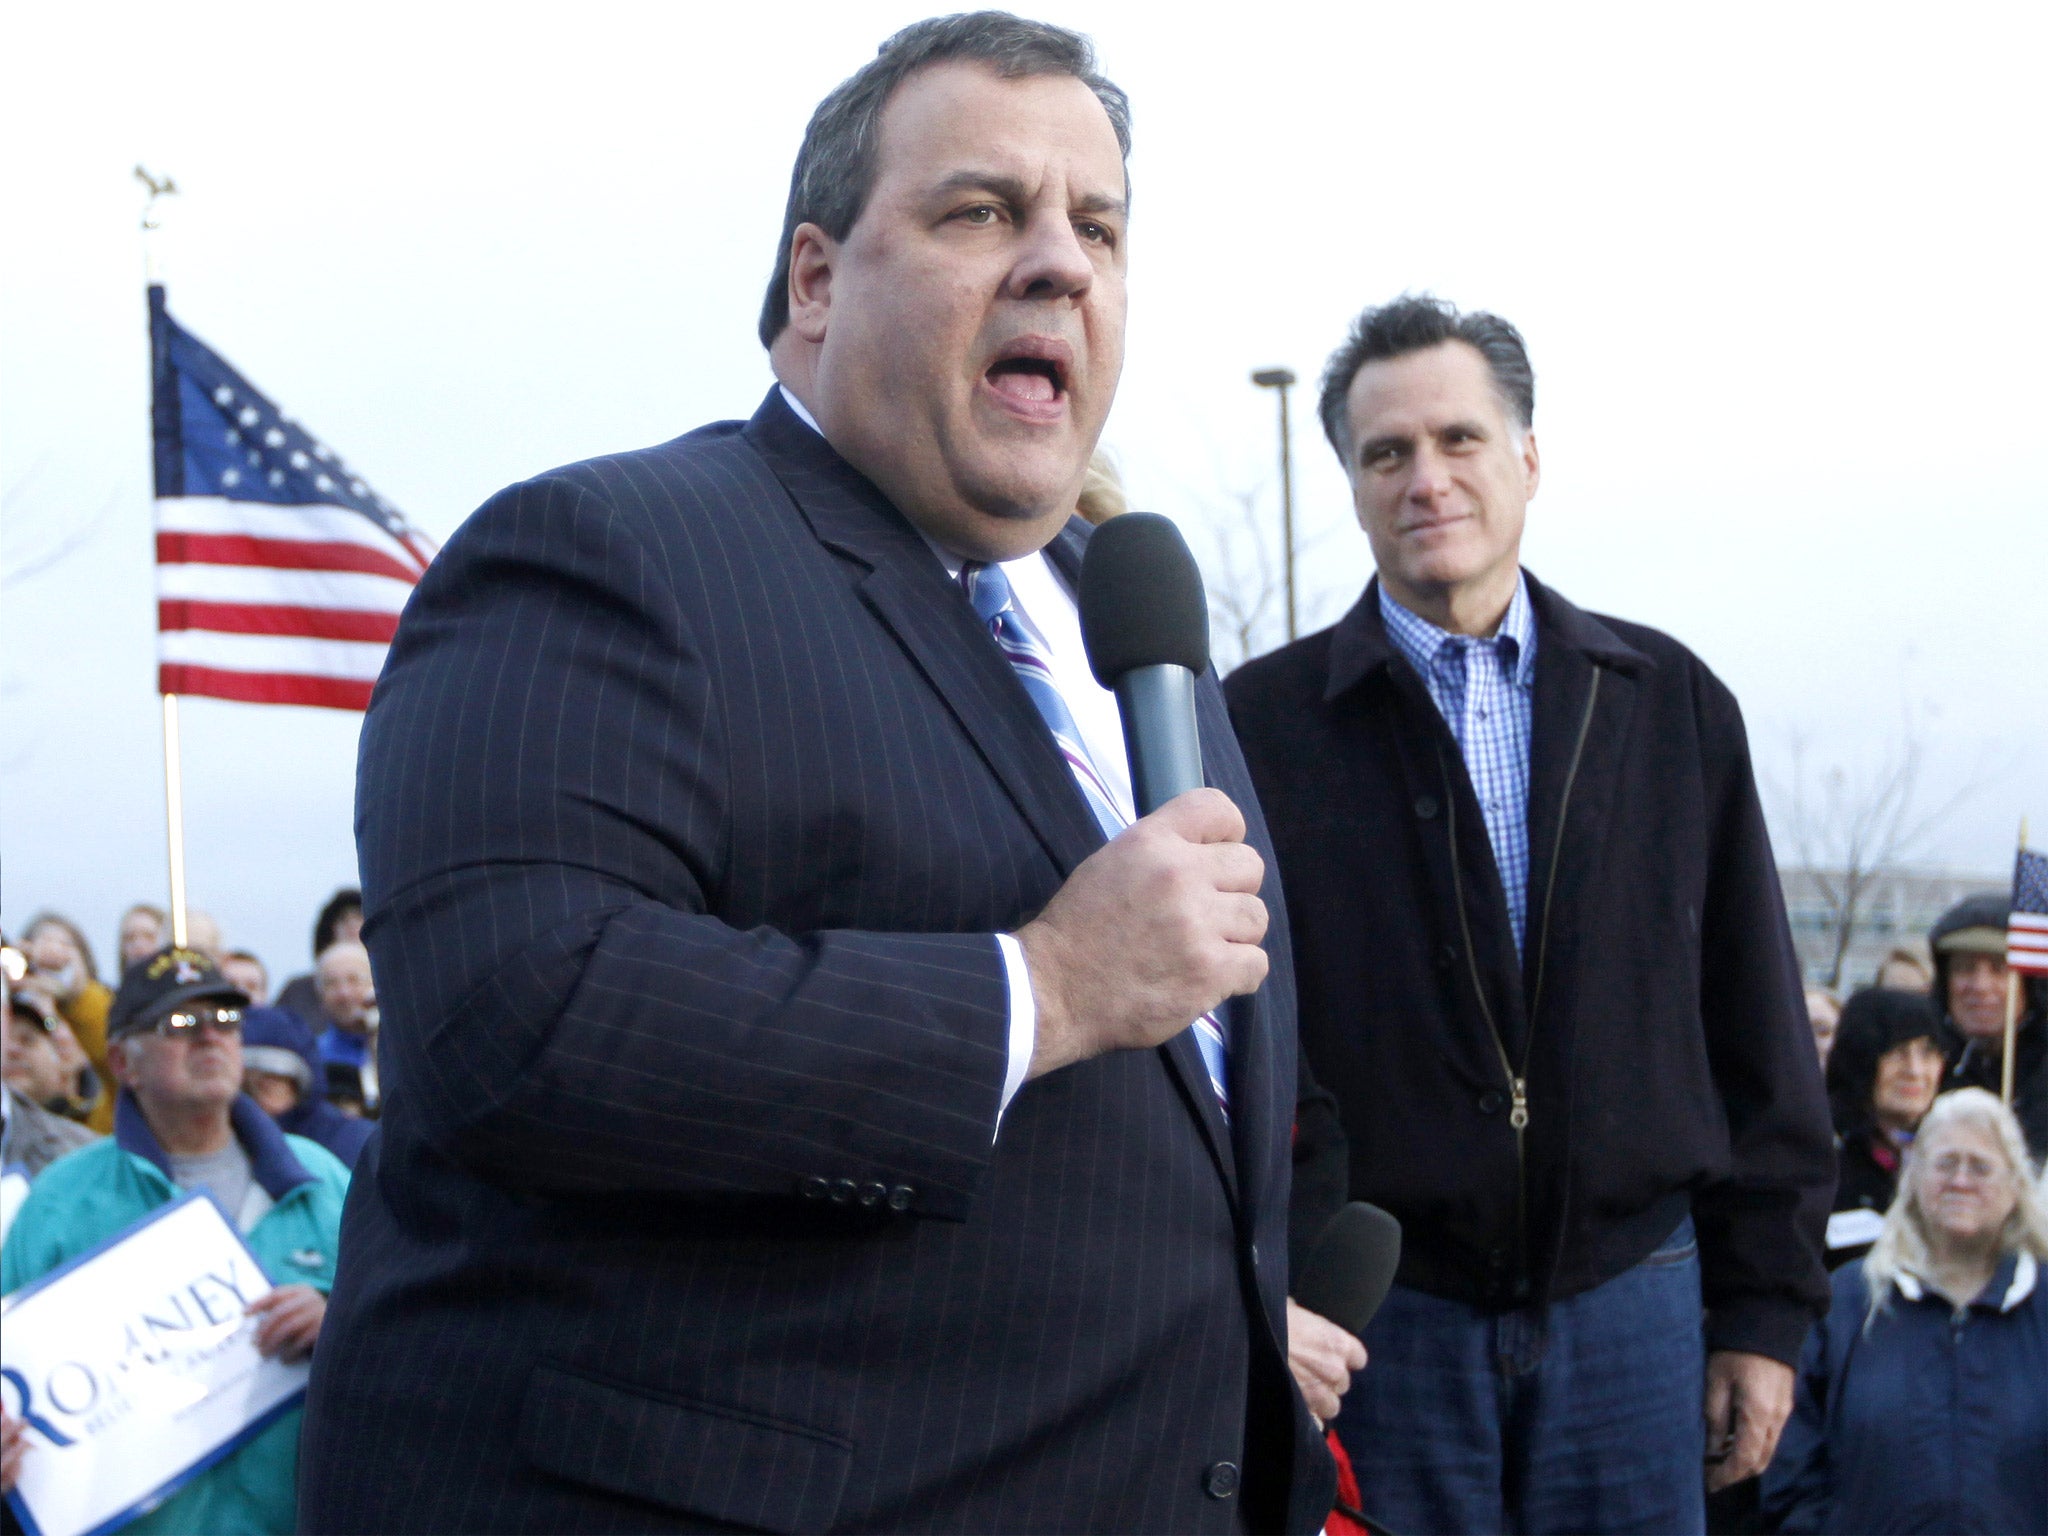 Chris Christie on the campaign trail with Mitt Romney in Des Moins, Iowa, in 2011